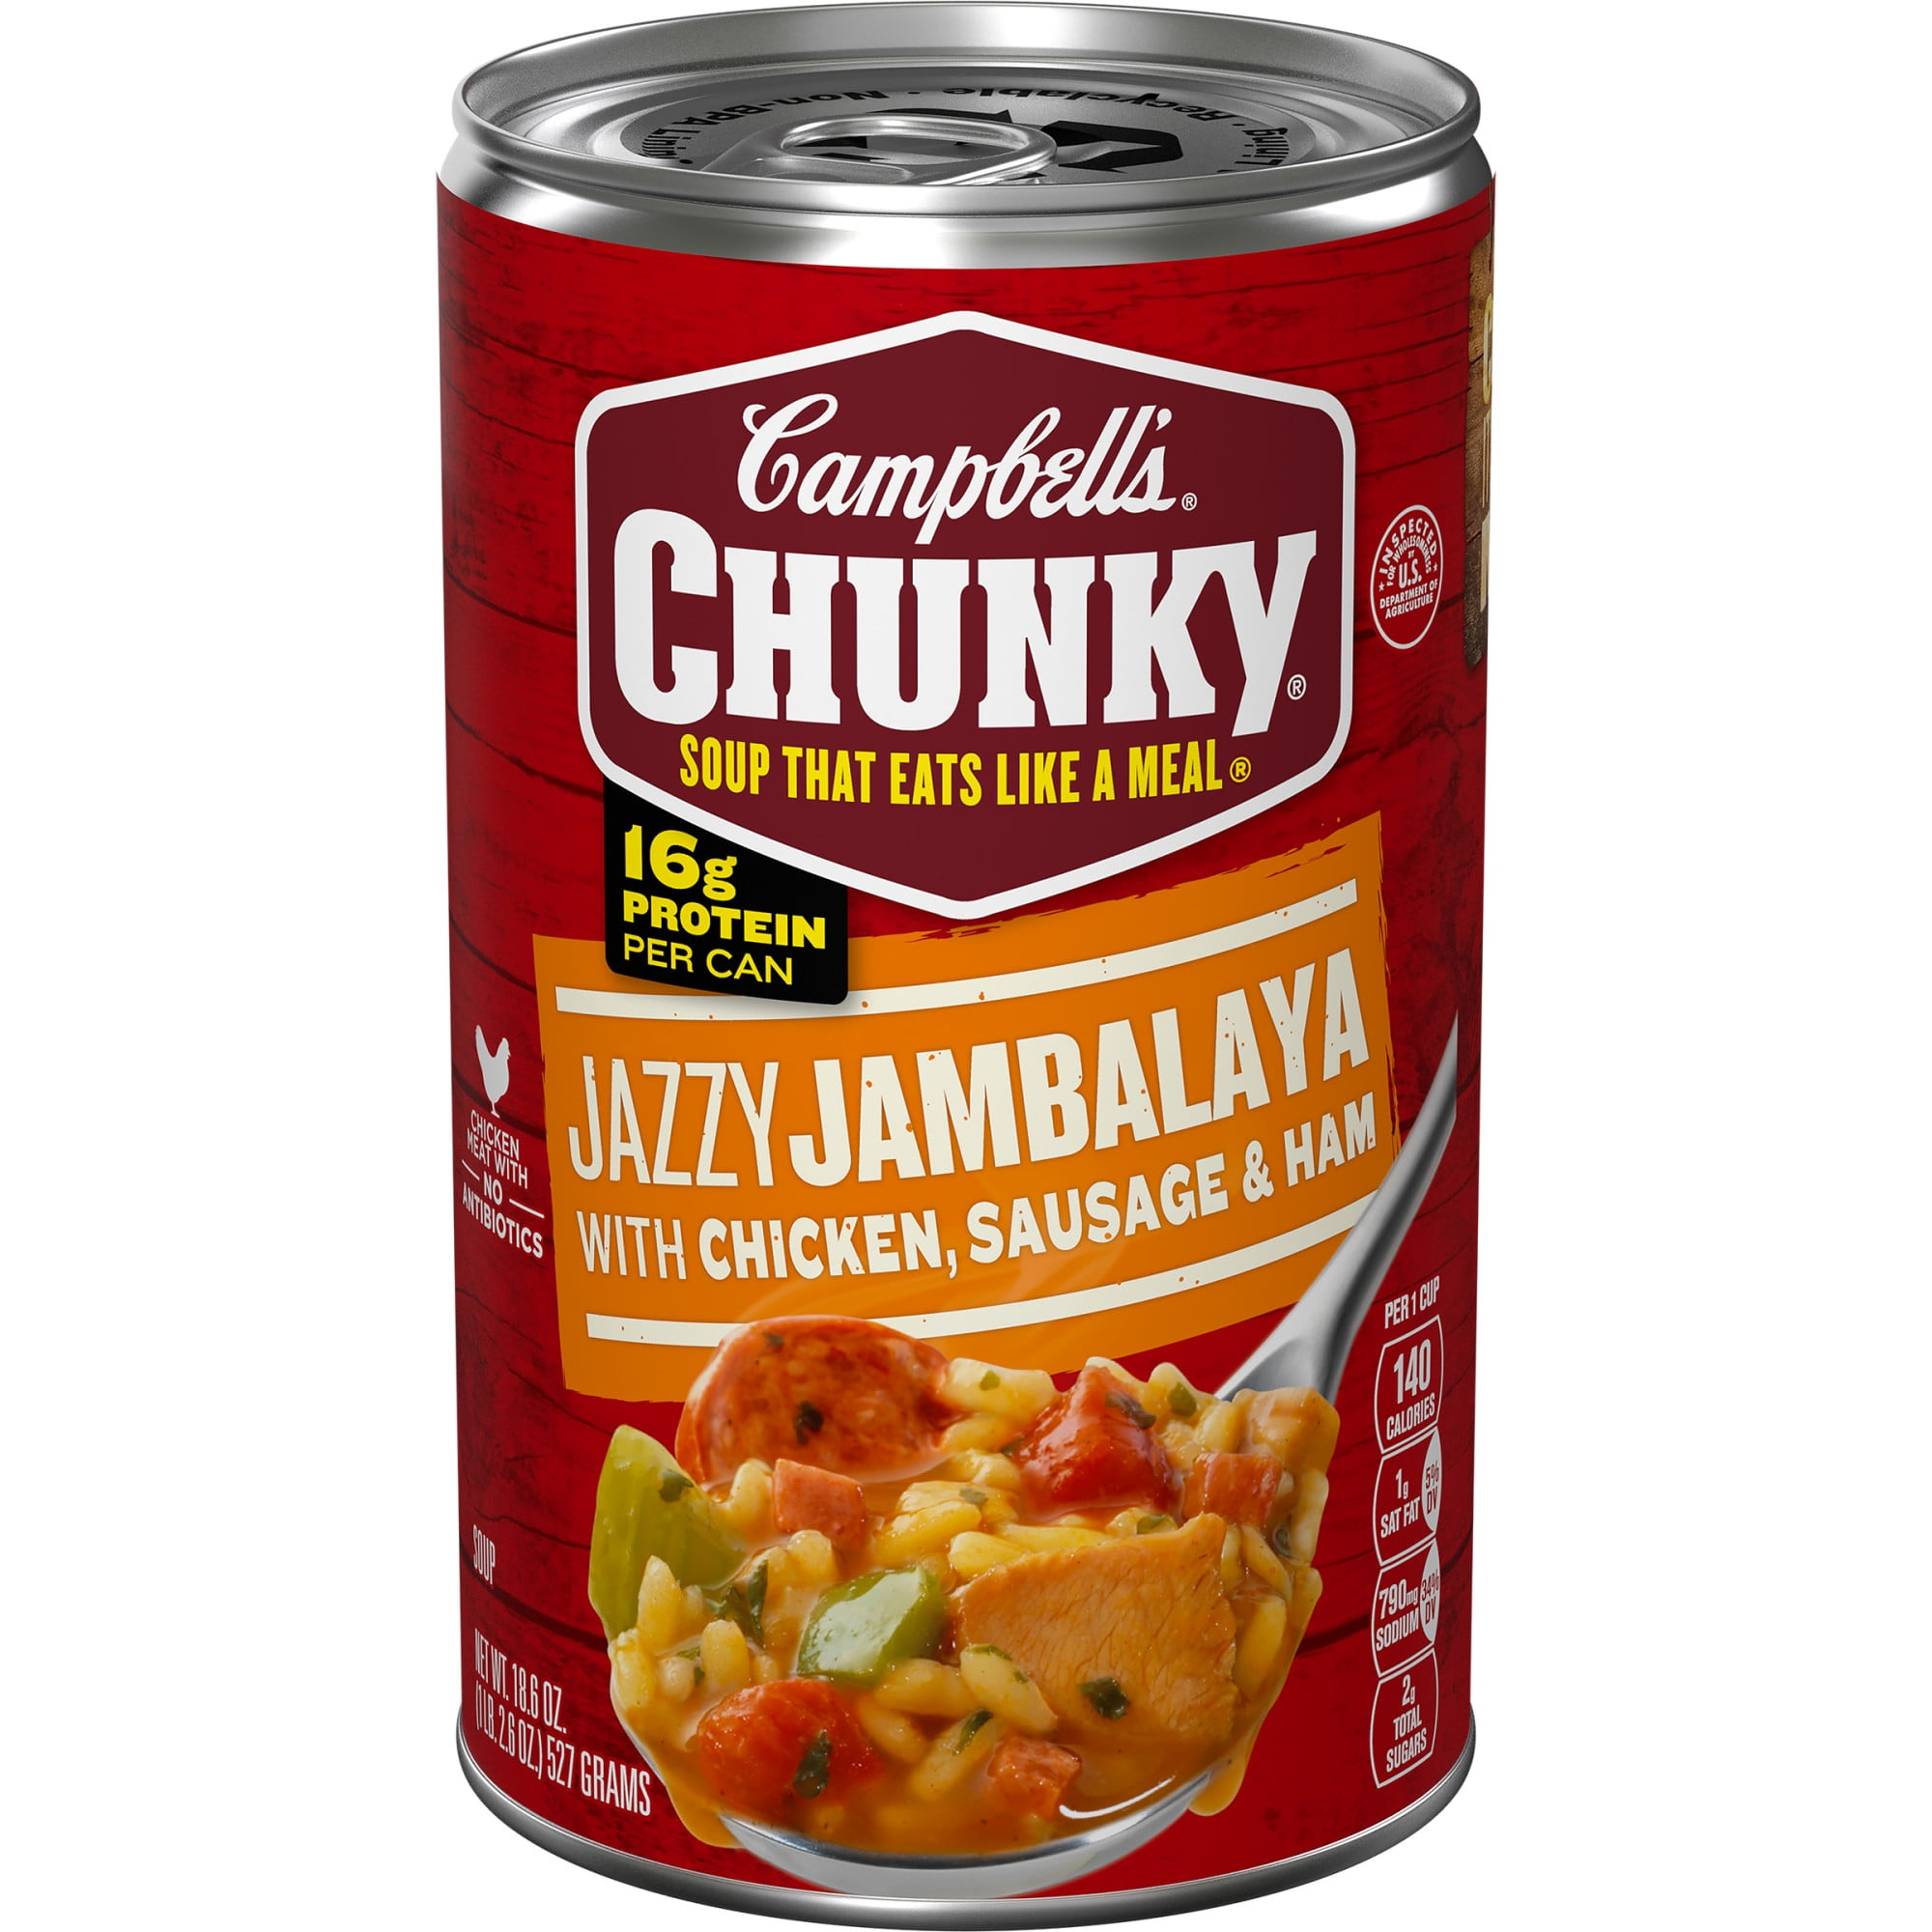 Campbells Chunky Soup, Ready to Serve Jazzy Jambalaya with Chicken, Sausage and Ham Soup, 18.6 Oz Can